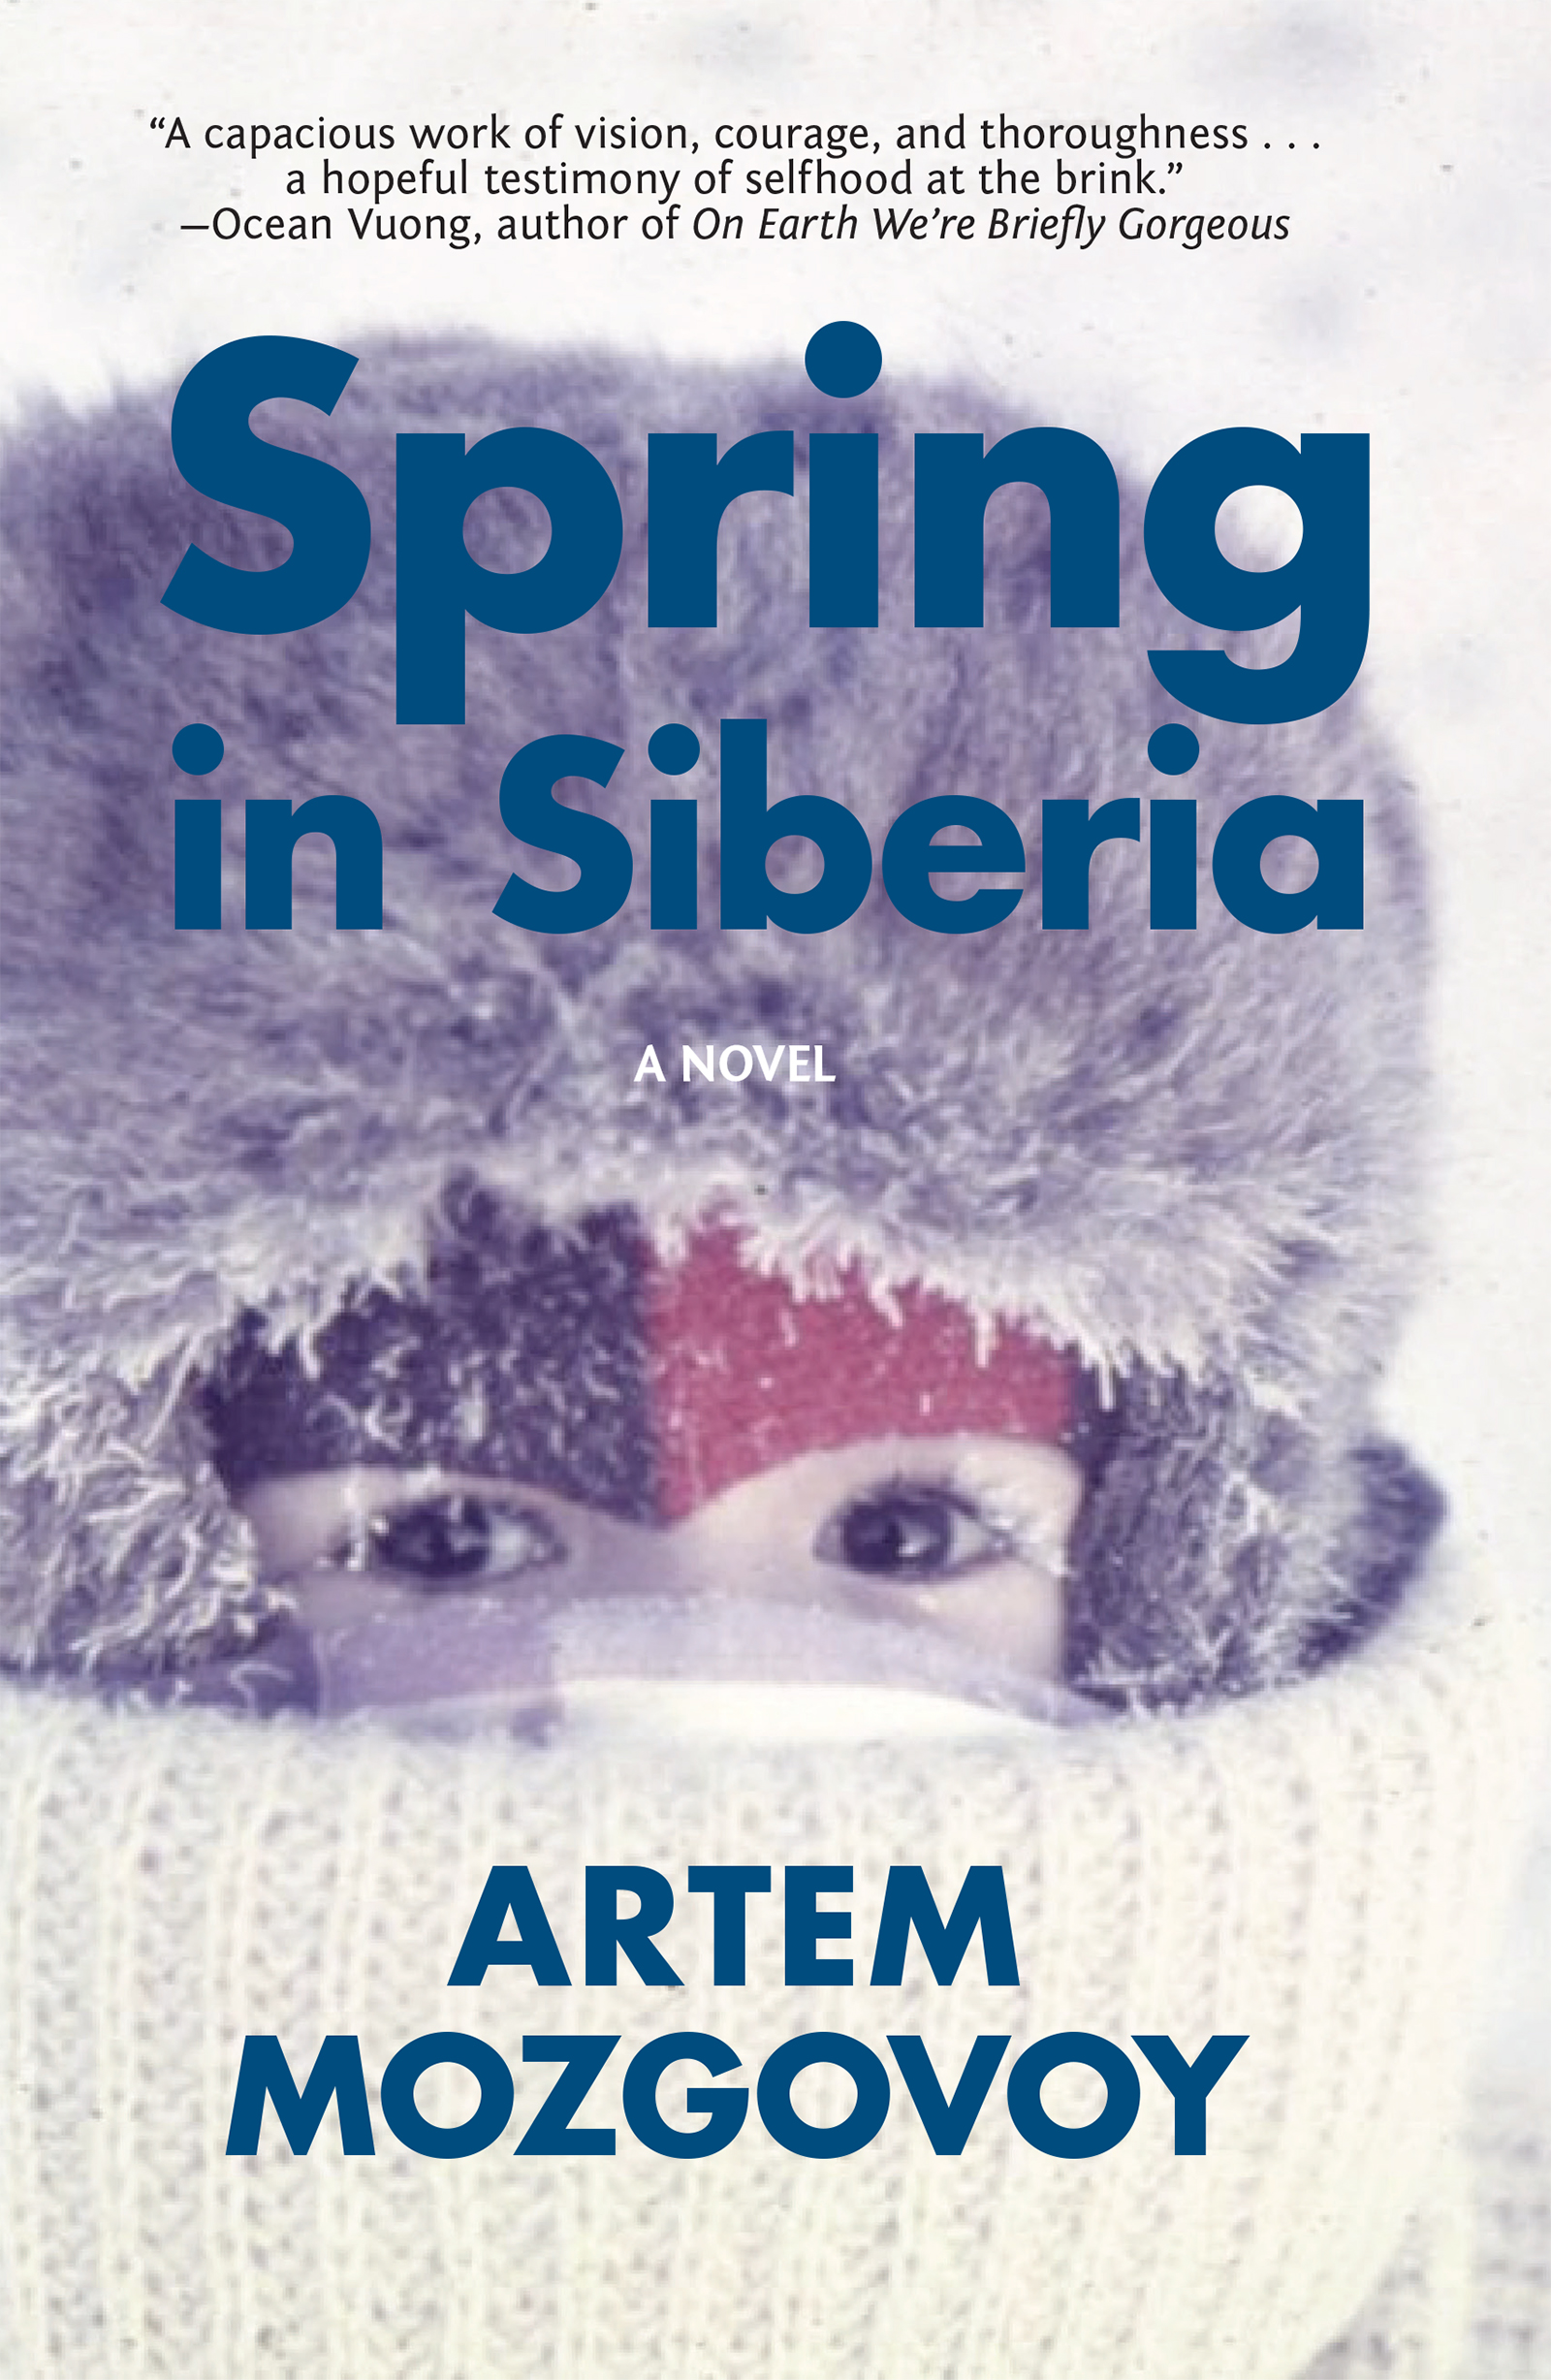 Blue text that reads in large block letters "Spring in Siberia: A Novel by Artem Mozgovoy" over an image of a young boy bundled in winter clothing with a large fur hat so only his eyes are seen, eyelashes coated in ice and snow